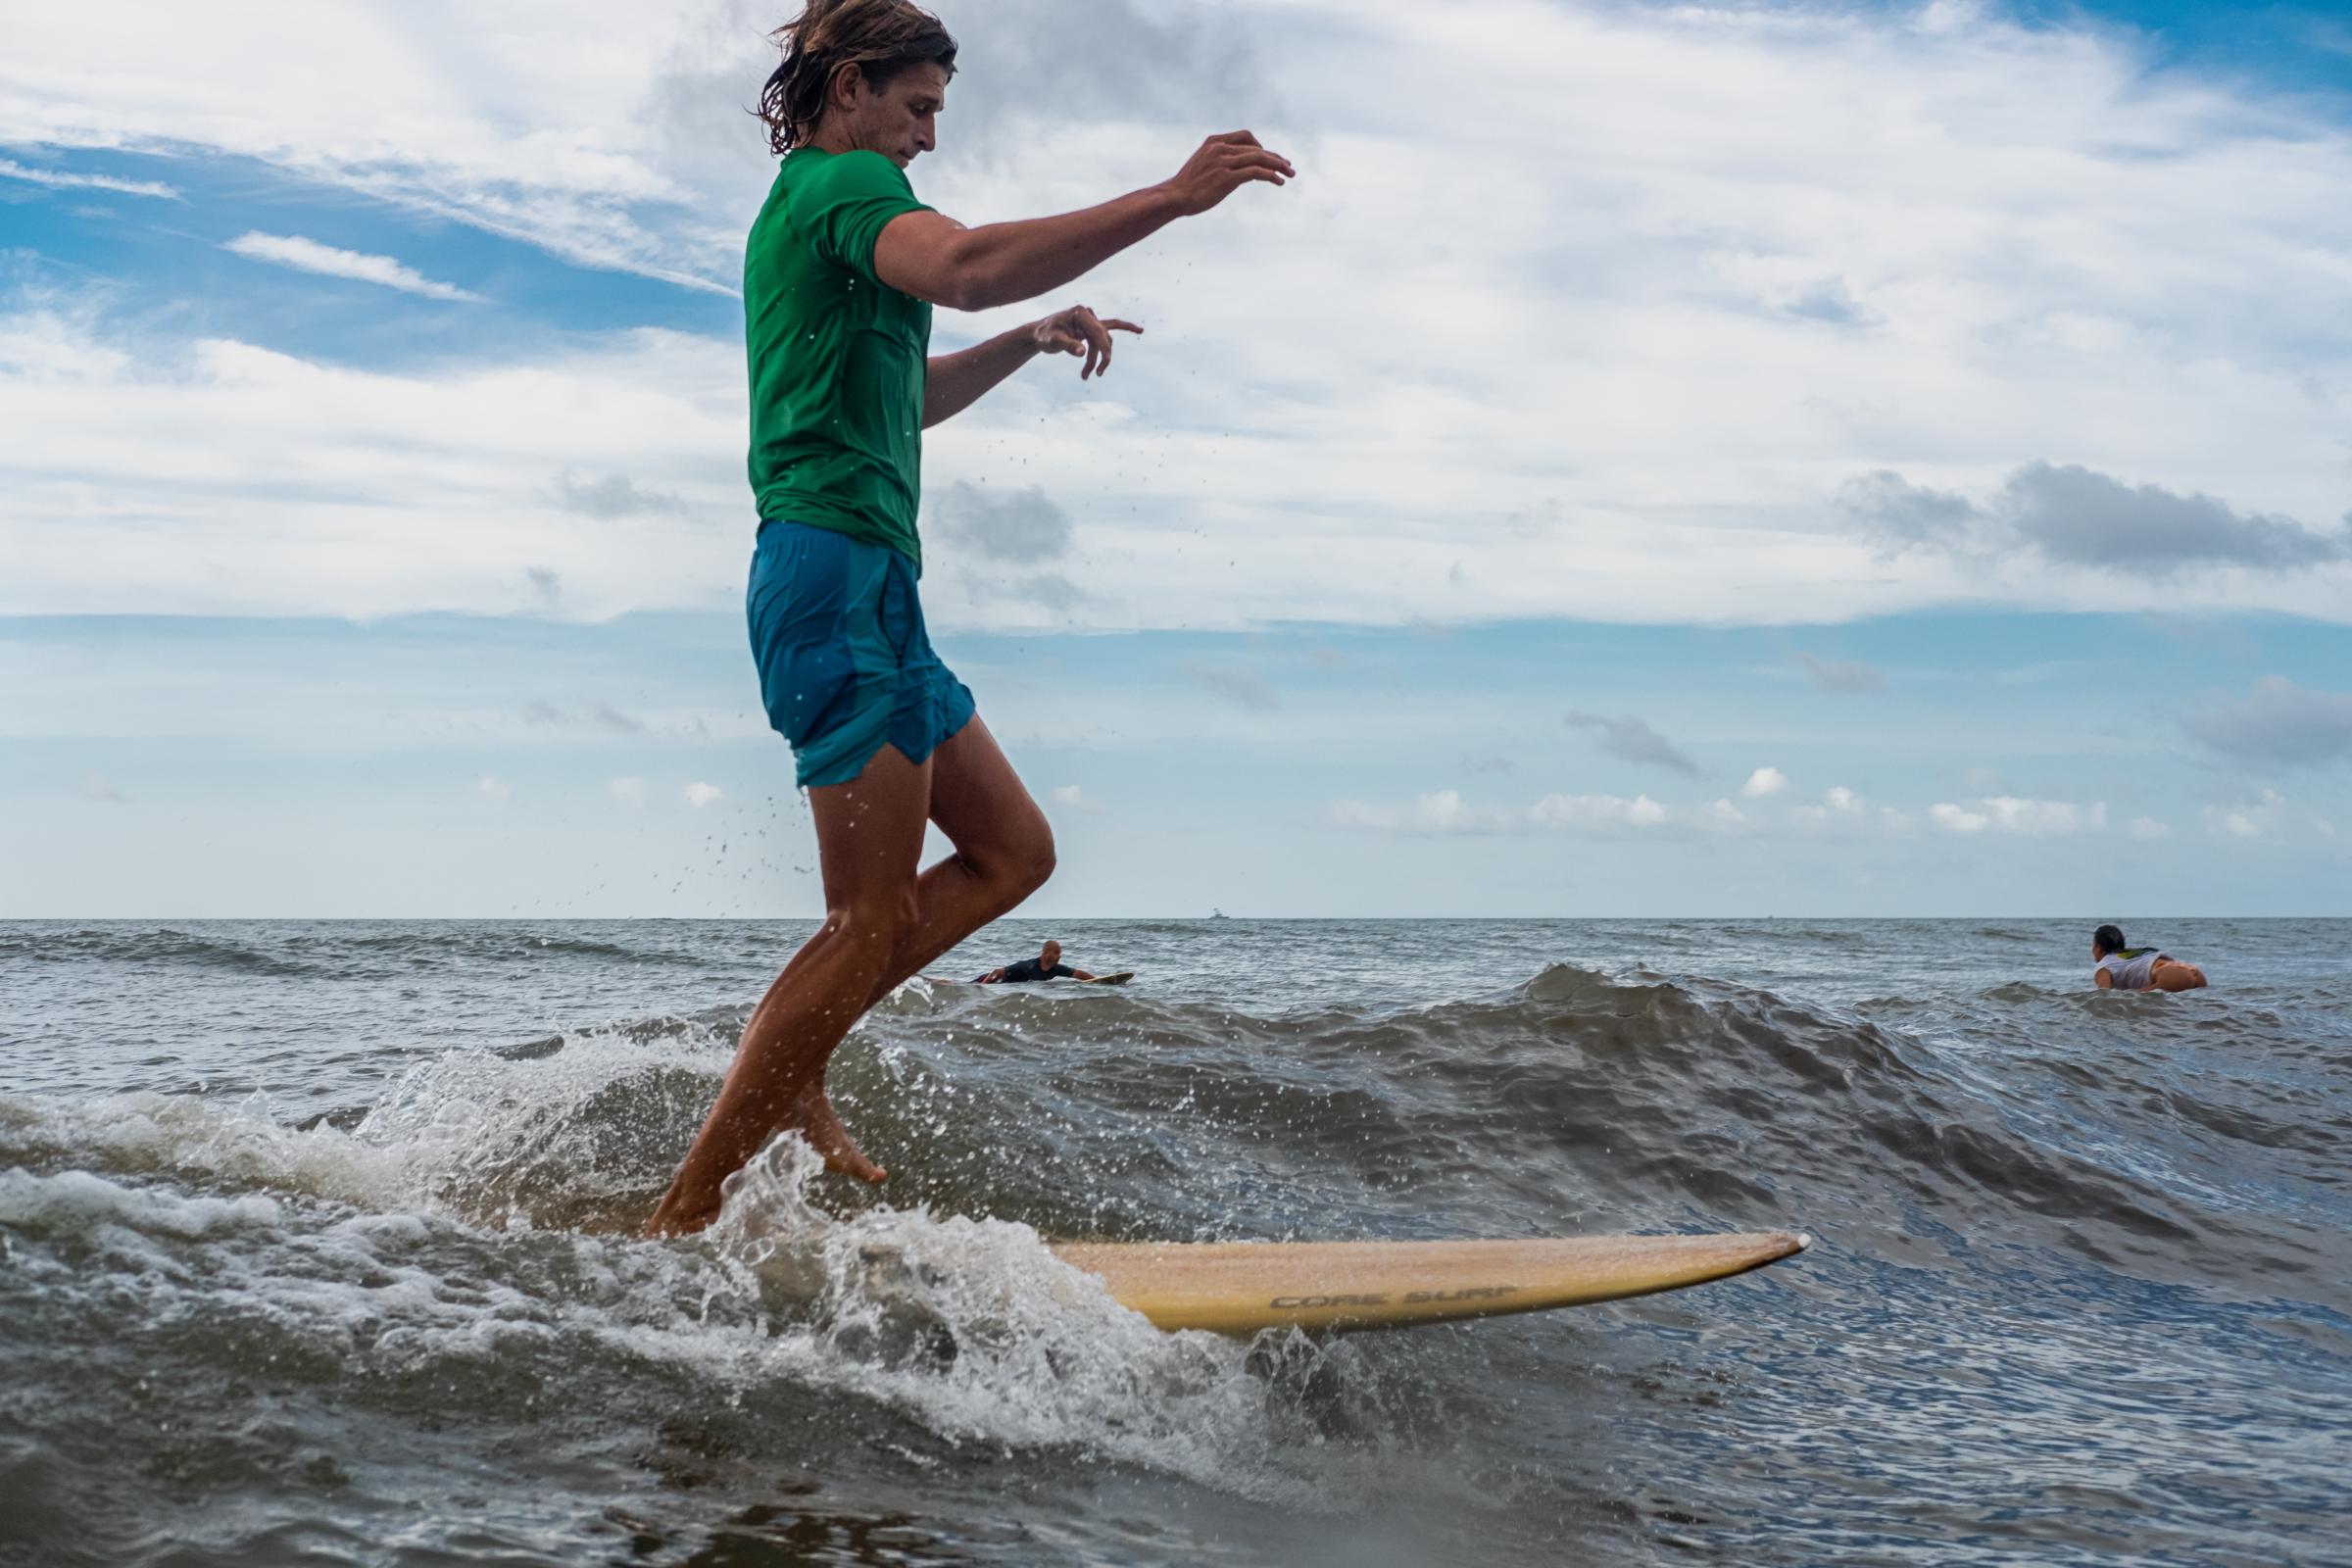  Keller Shogren walking on a 1960s longboard at the Third Annual Hotdogzonastix Surf Contest presented by Core Surf. Cape Canaveral, FL. July 3,...